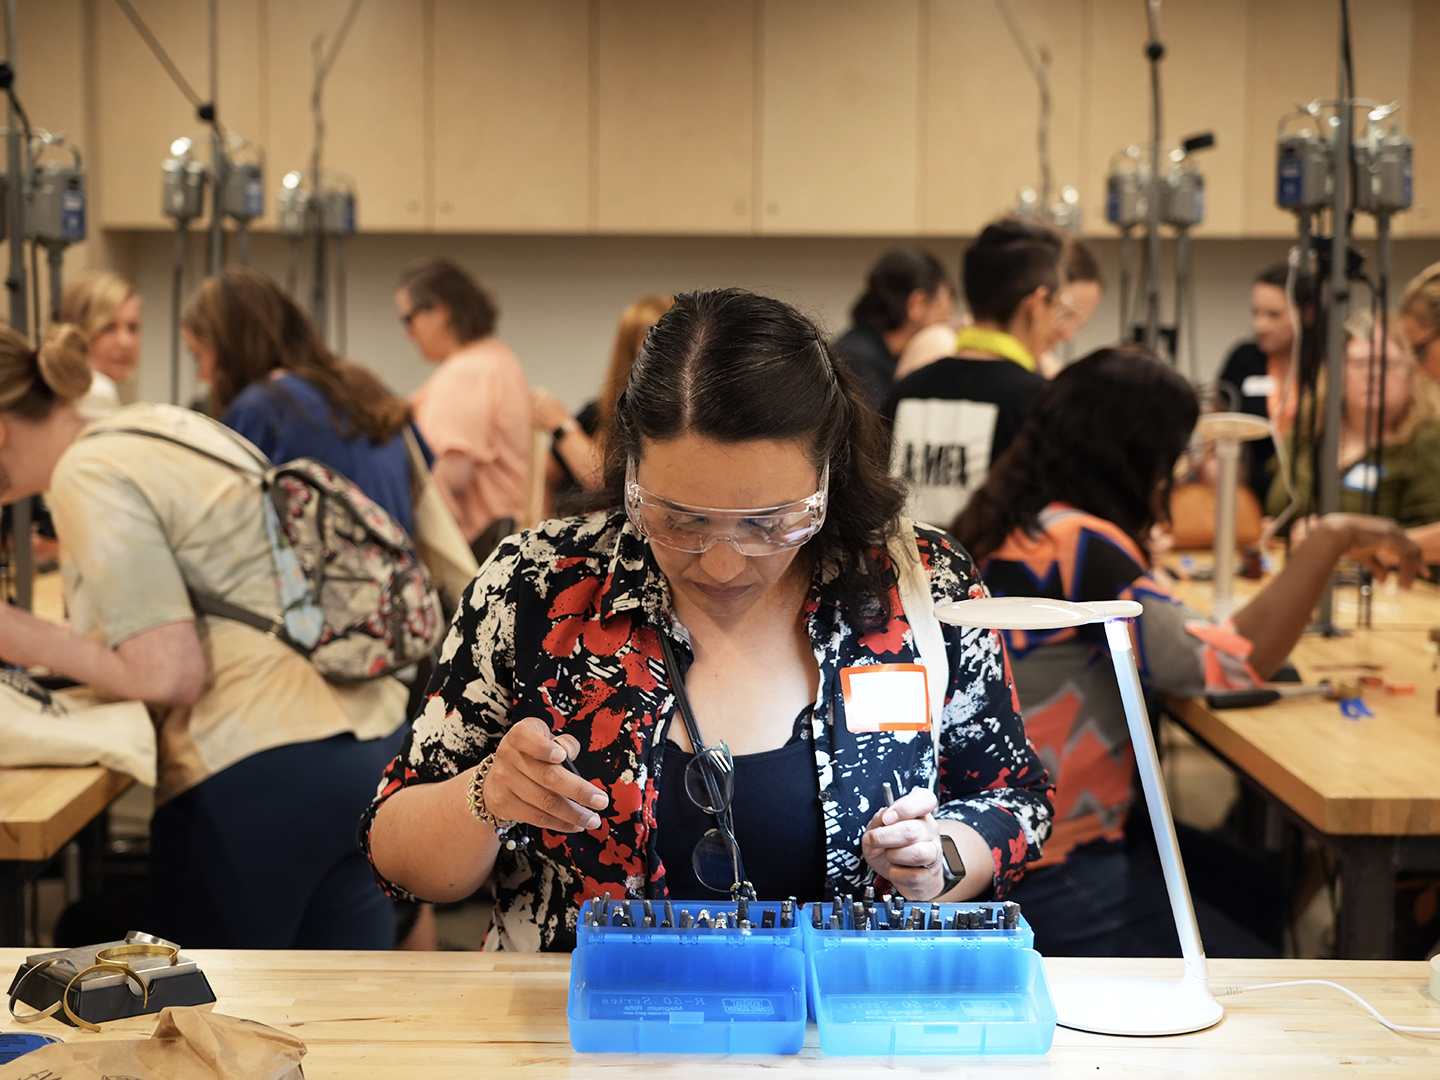 Photo of a woman wearing goggles and looking in a blue box of metal tools in an art studio where other people are interacting in the background.